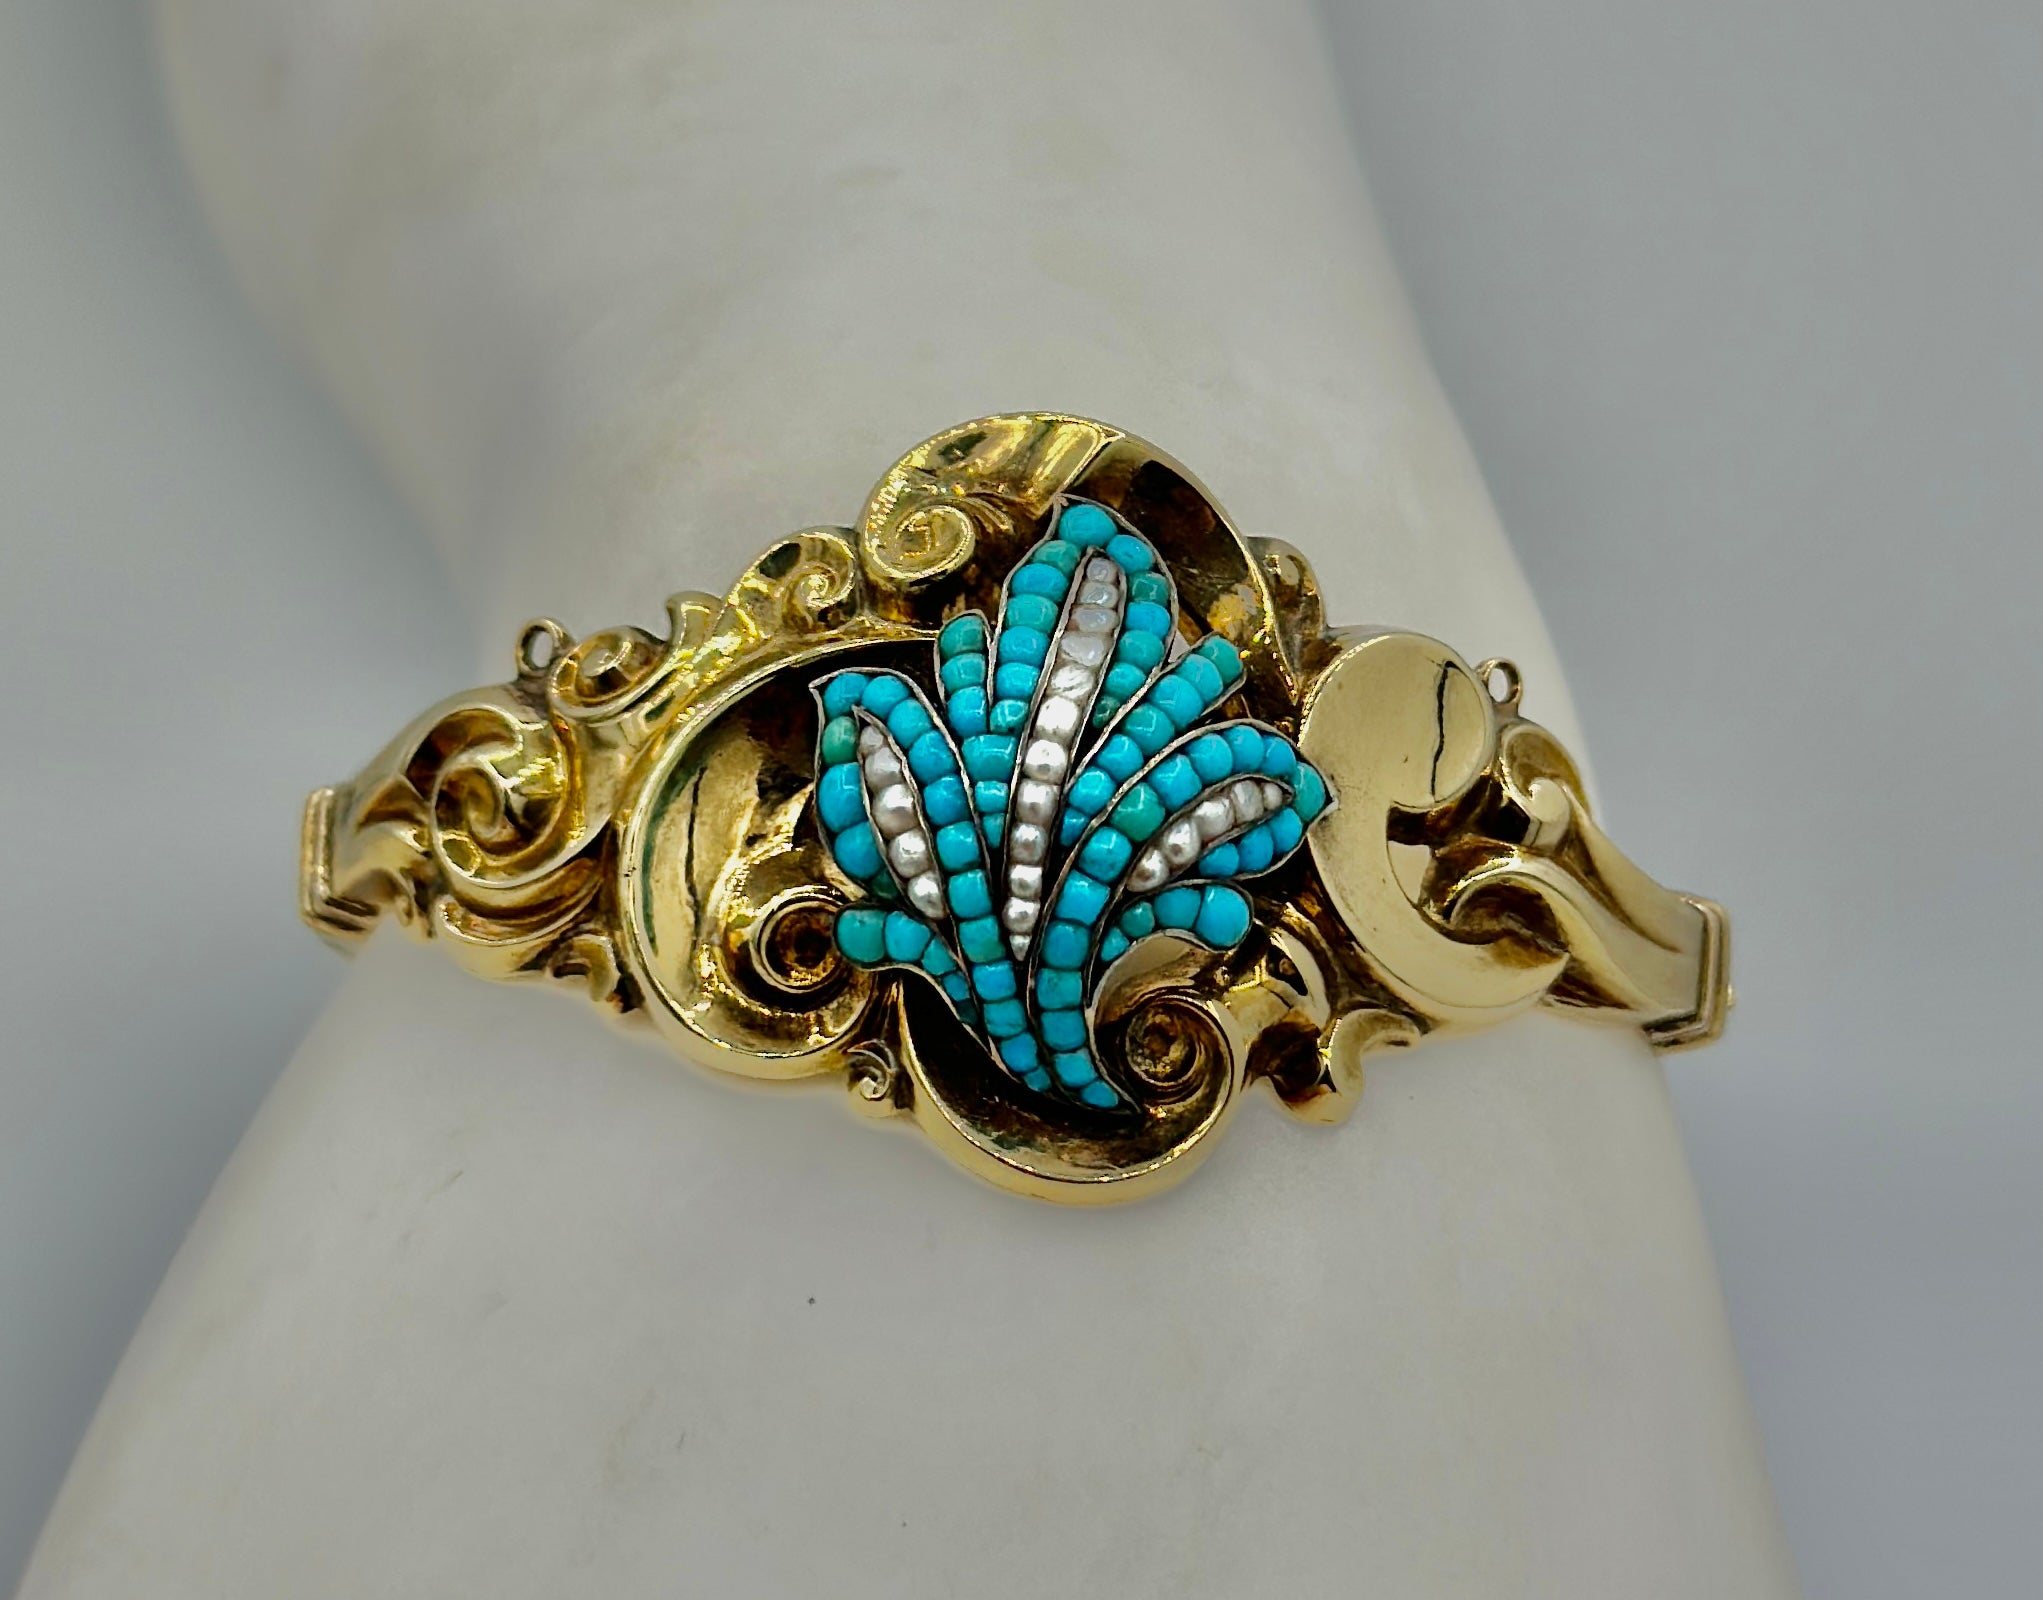 This is a gorgeous antique Victorian Turquoise, Pearl and Gold Bangle Bracelet.   The hinged bangle bracelet has elegant repoussé scroll and leaf motifs, set with turquoise cabochons and seed pearls.  The interior circumference is 6 3/8 inches and